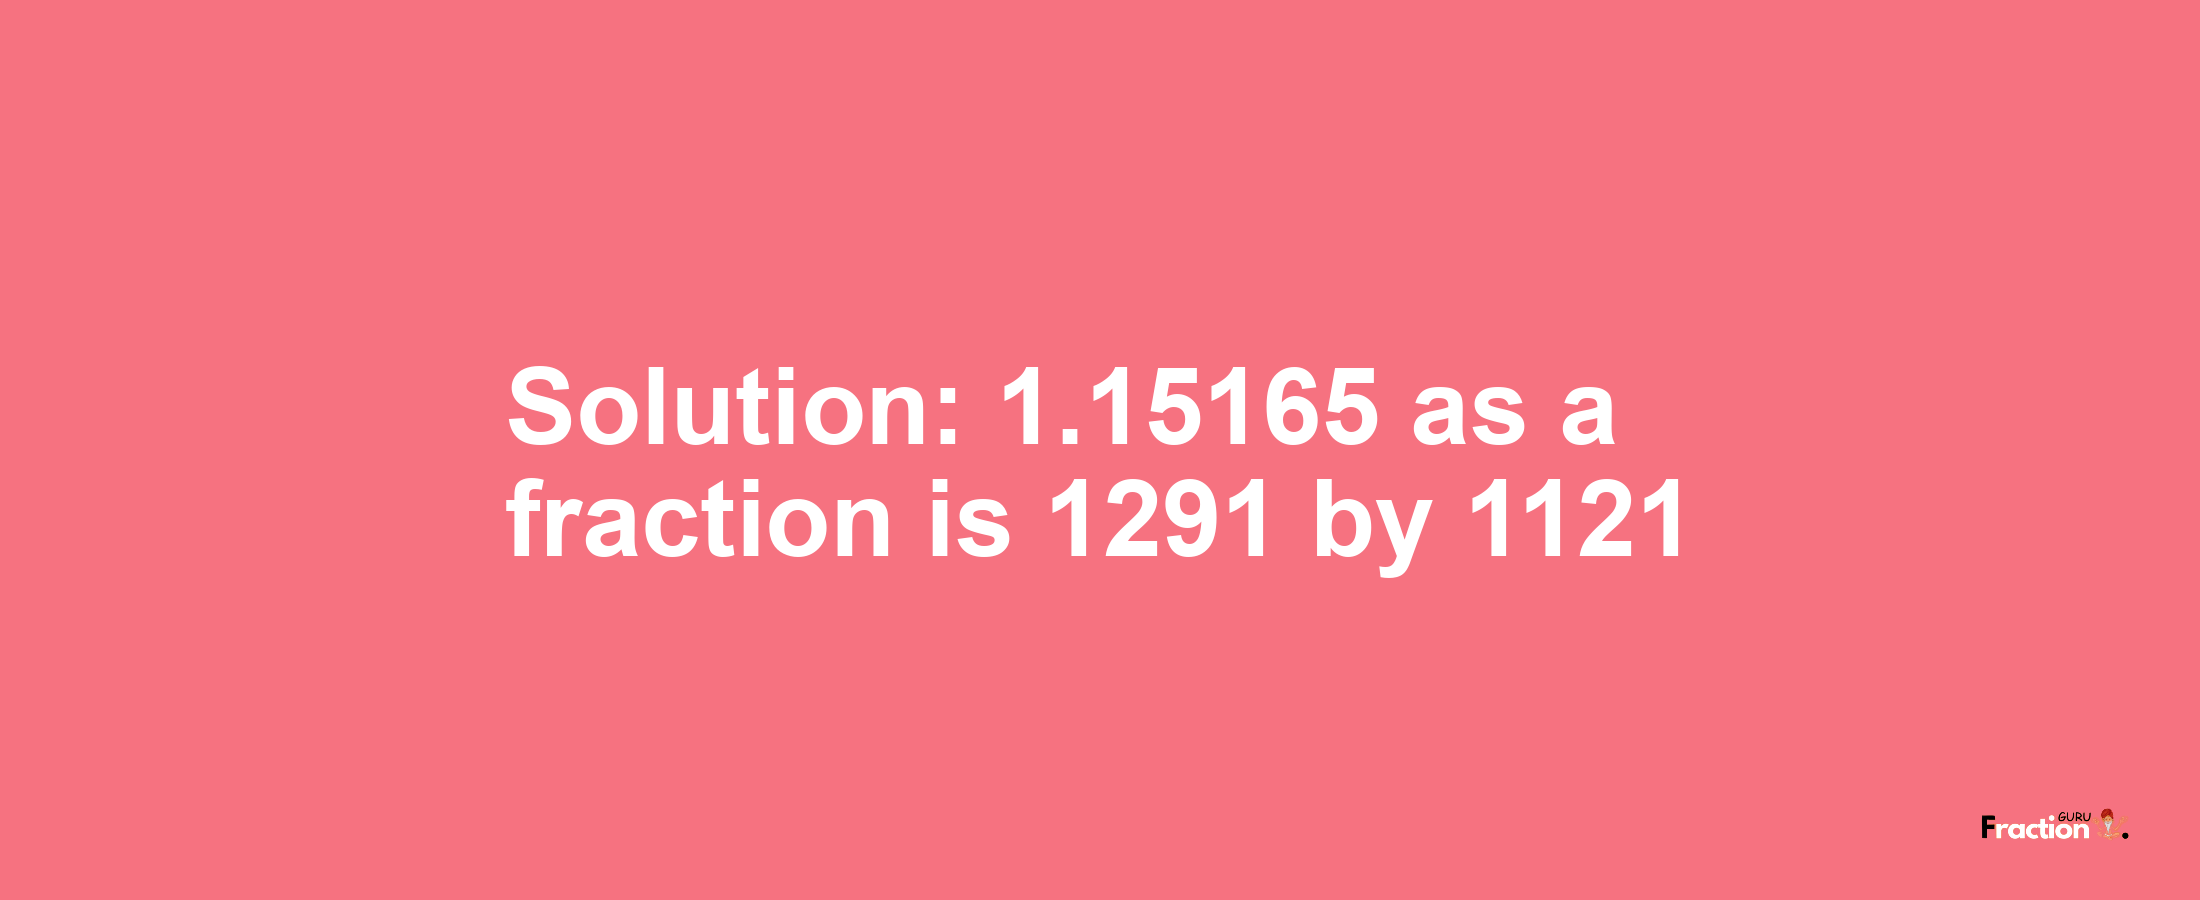 Solution:1.15165 as a fraction is 1291/1121